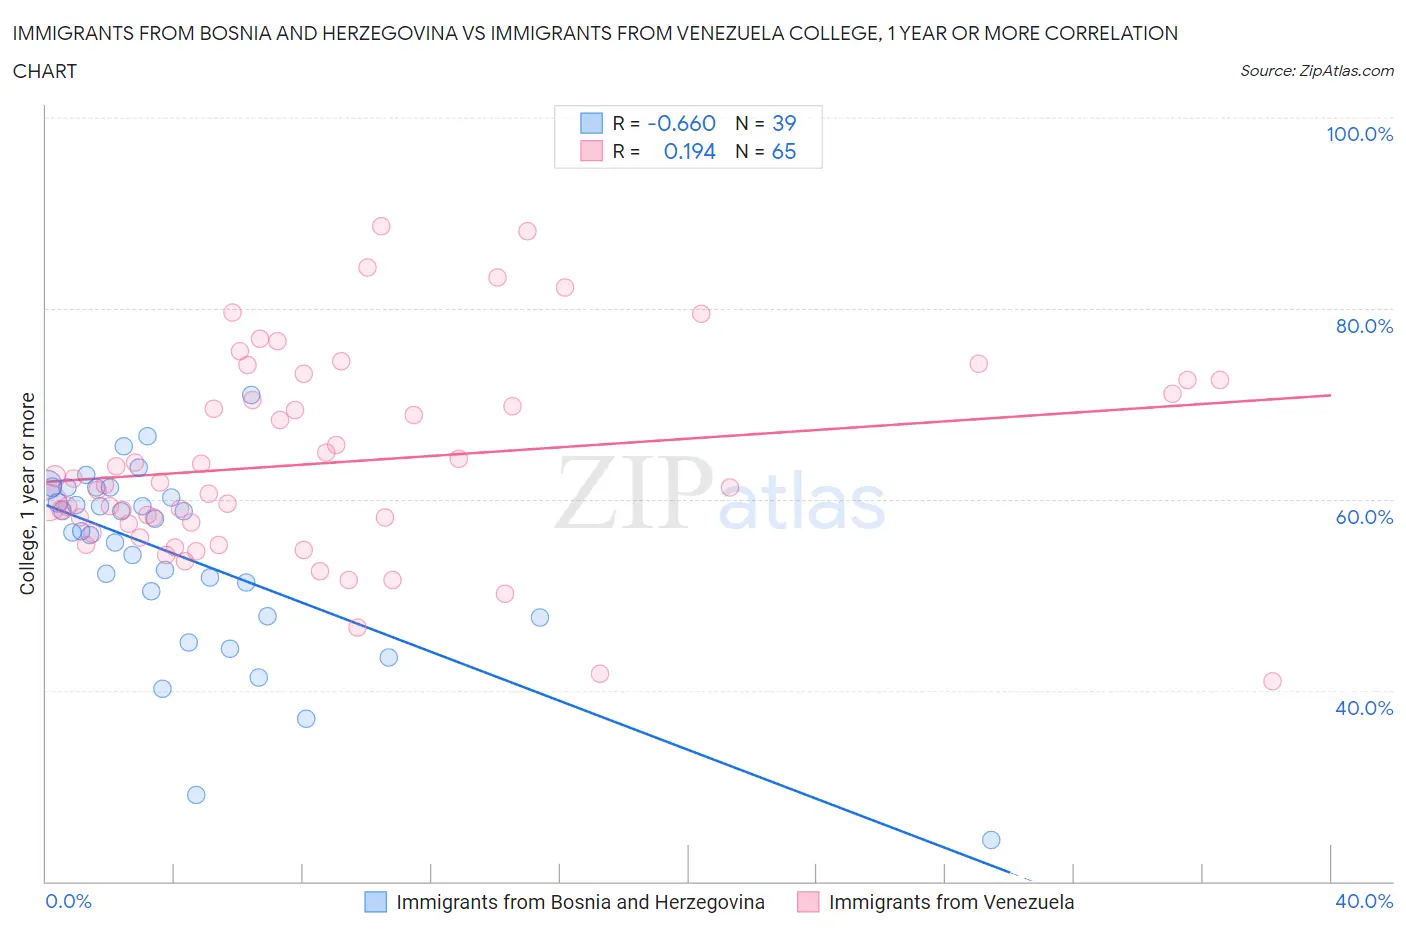 Immigrants from Bosnia and Herzegovina vs Immigrants from Venezuela College, 1 year or more